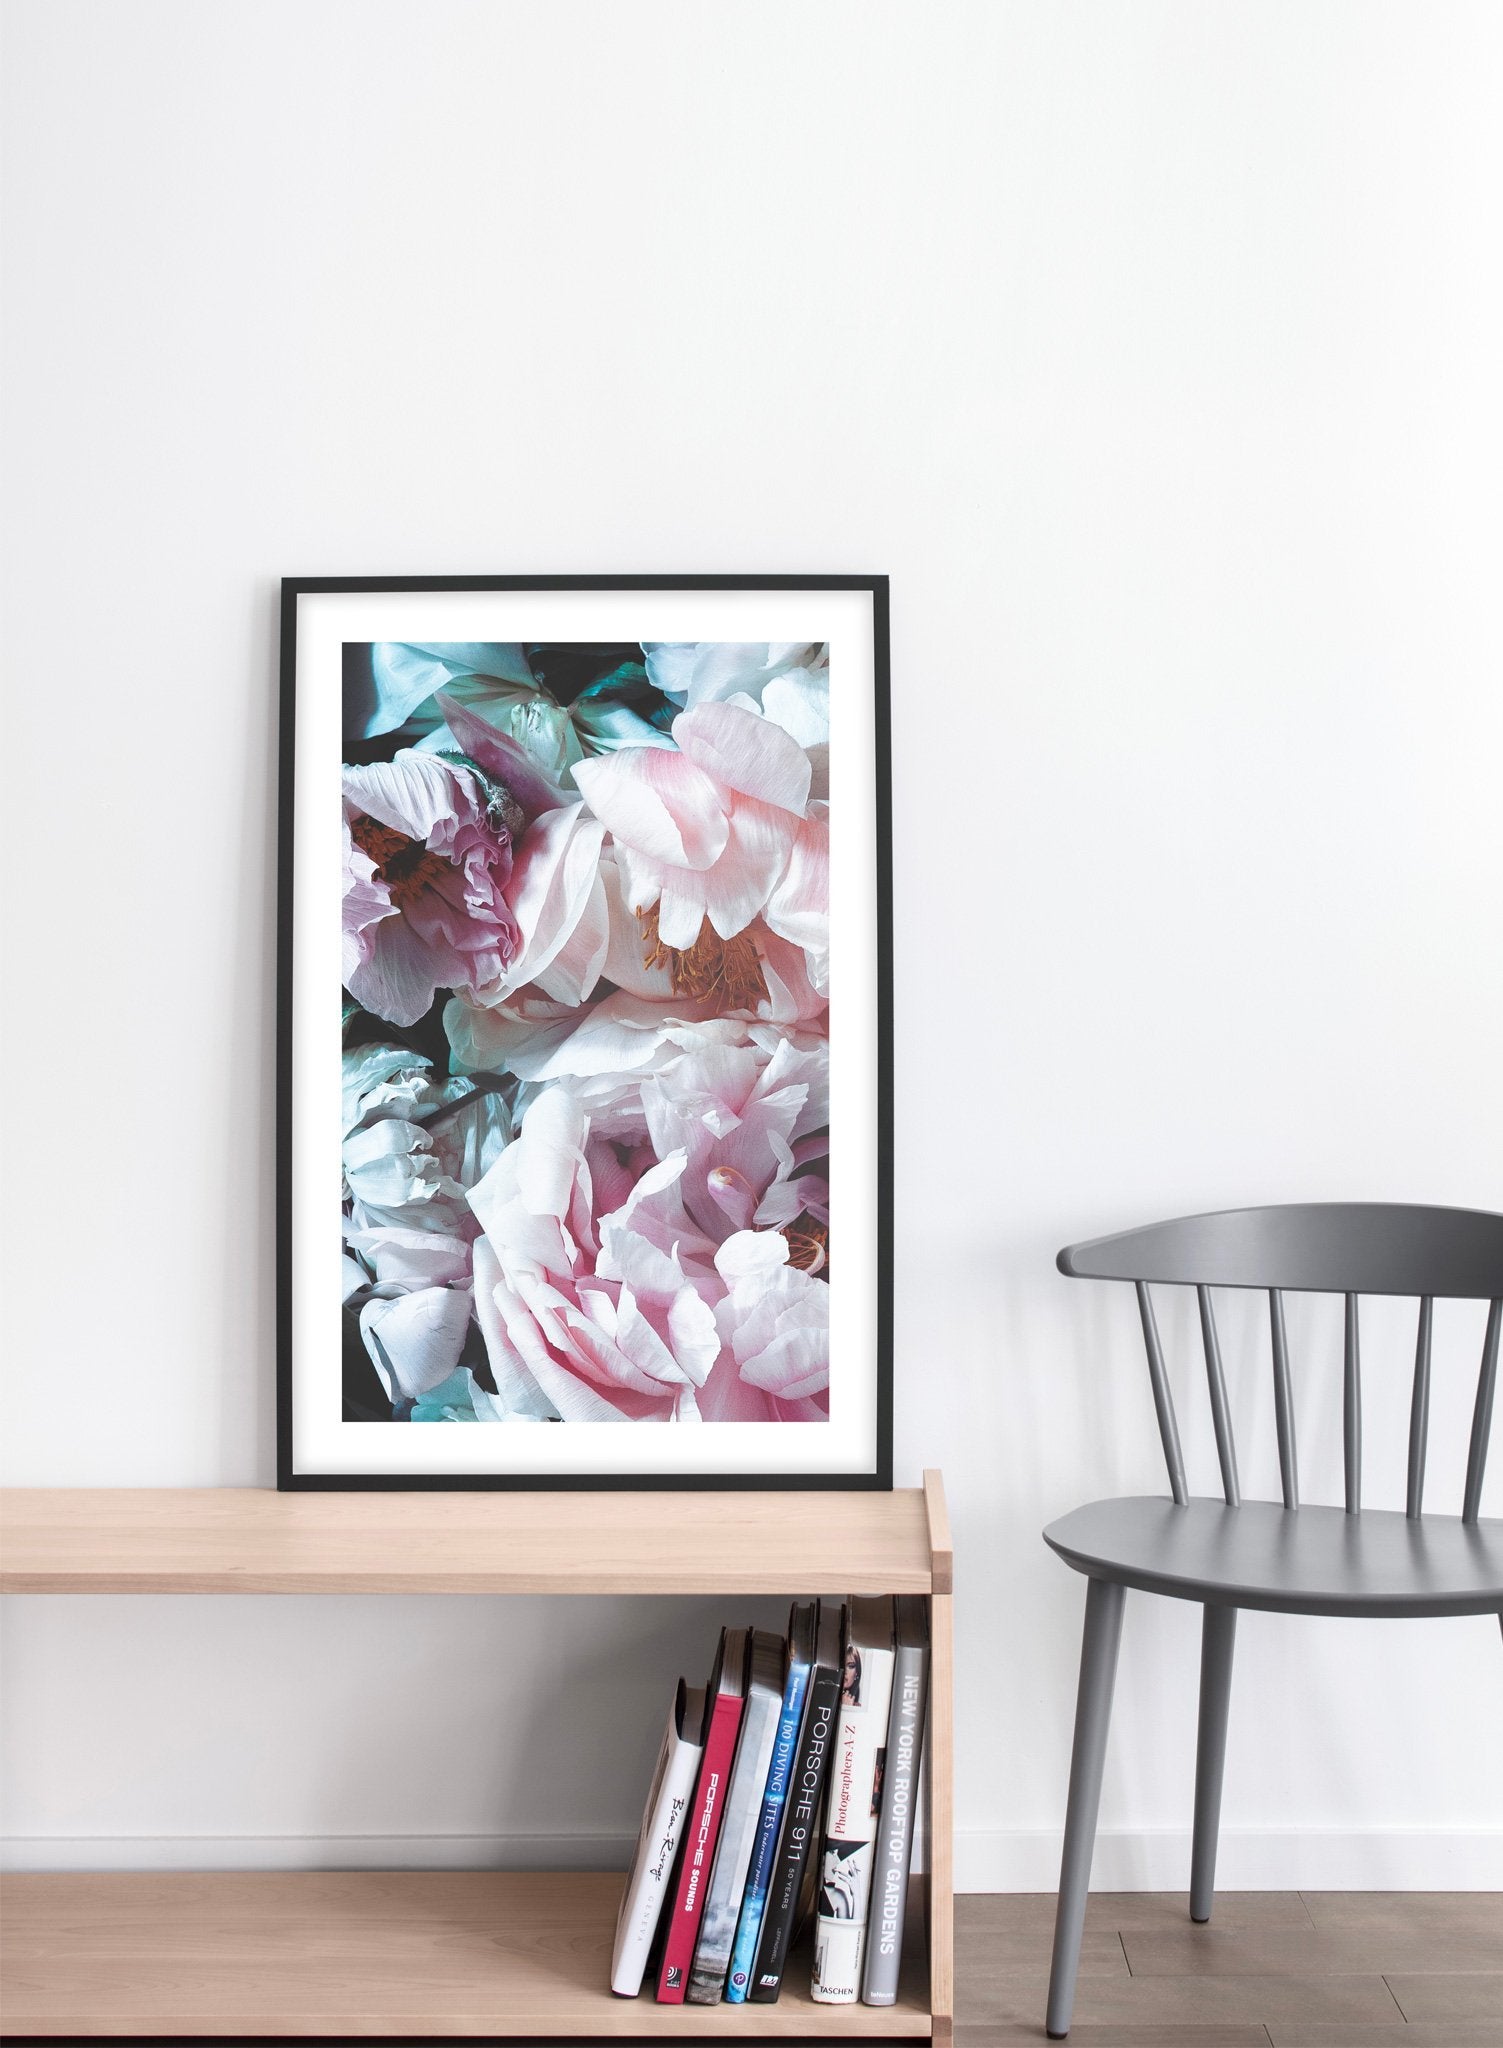 Droopy Petals modern minimalist floral photography poster by Opposite Wall - Living Room